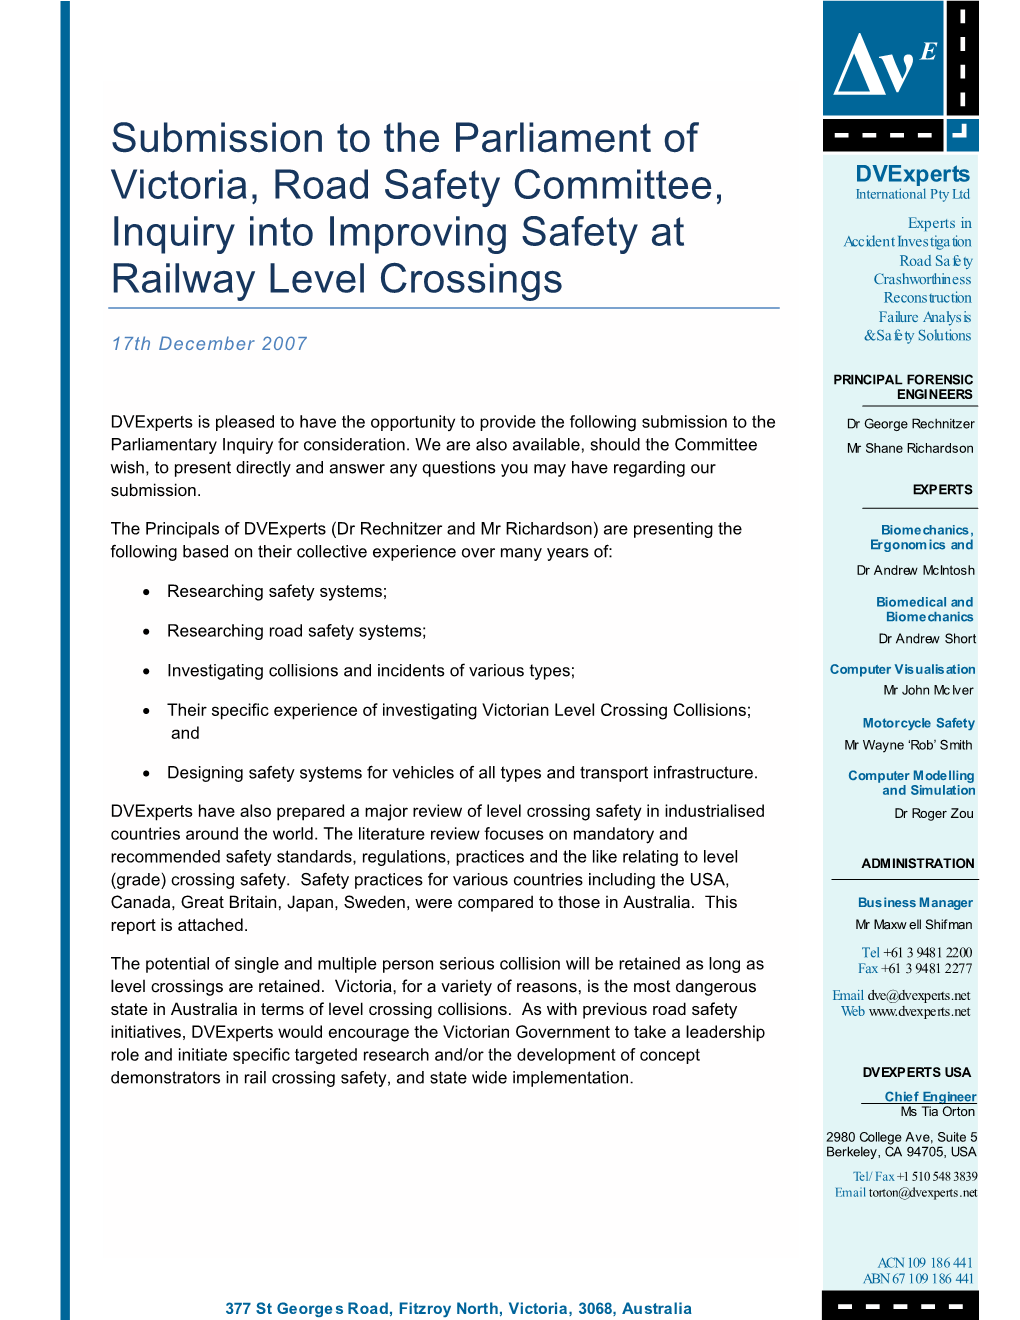 Submission to the Parliament of Victoria, Road Safety Committee, Inquiry Into Improving Safety at Railway Level Crossings